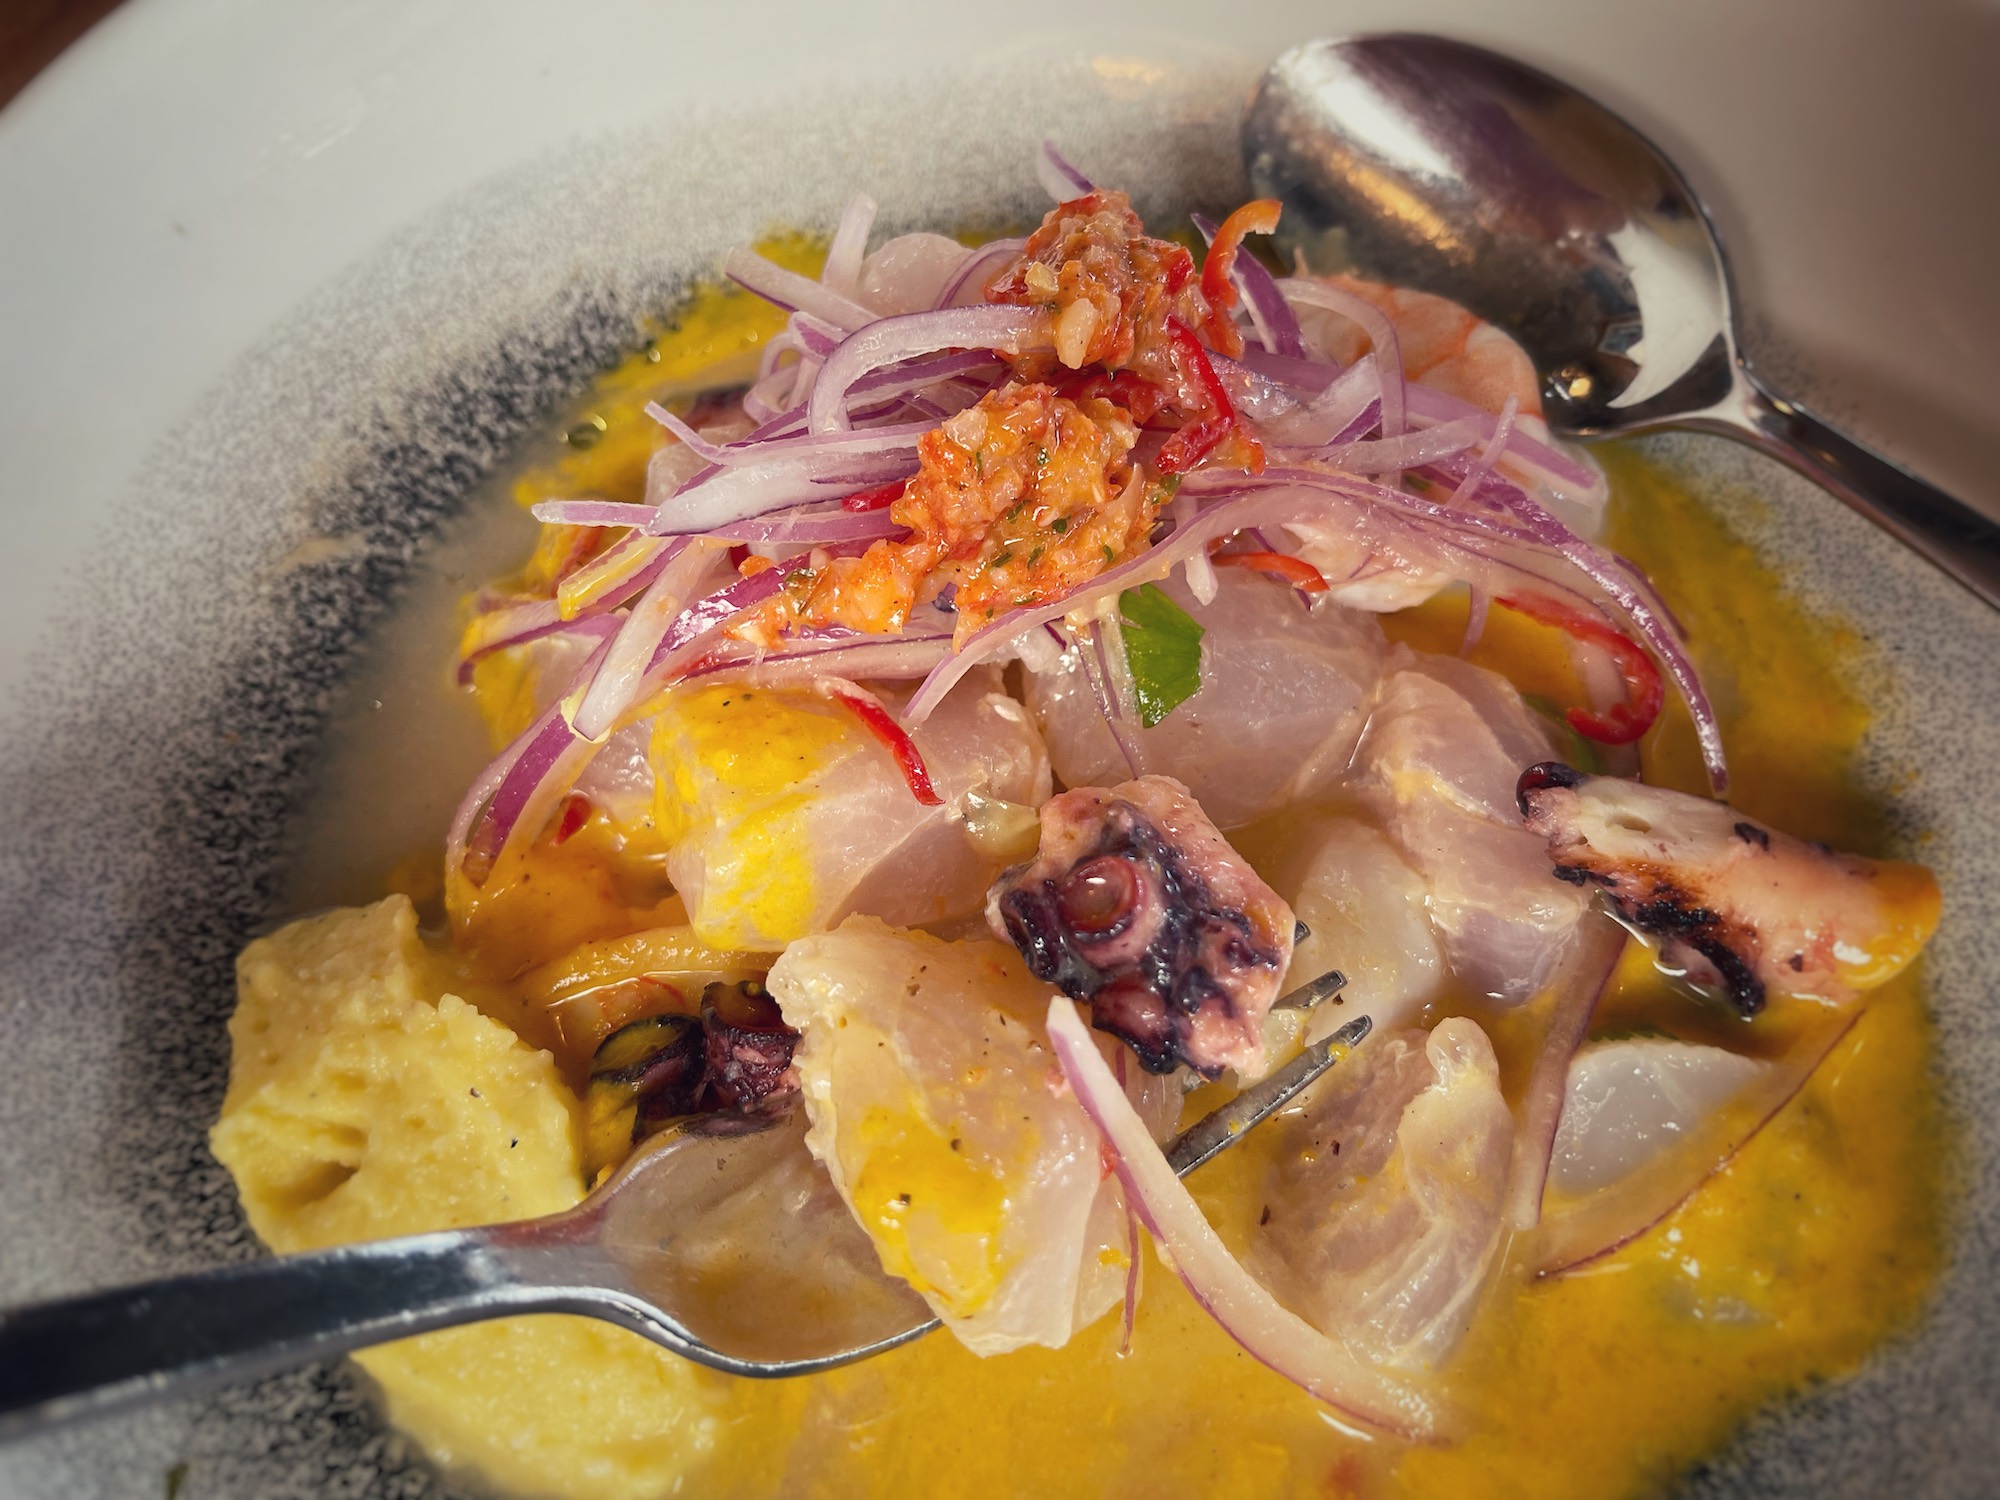 Some of the Best Ceviches in Lima